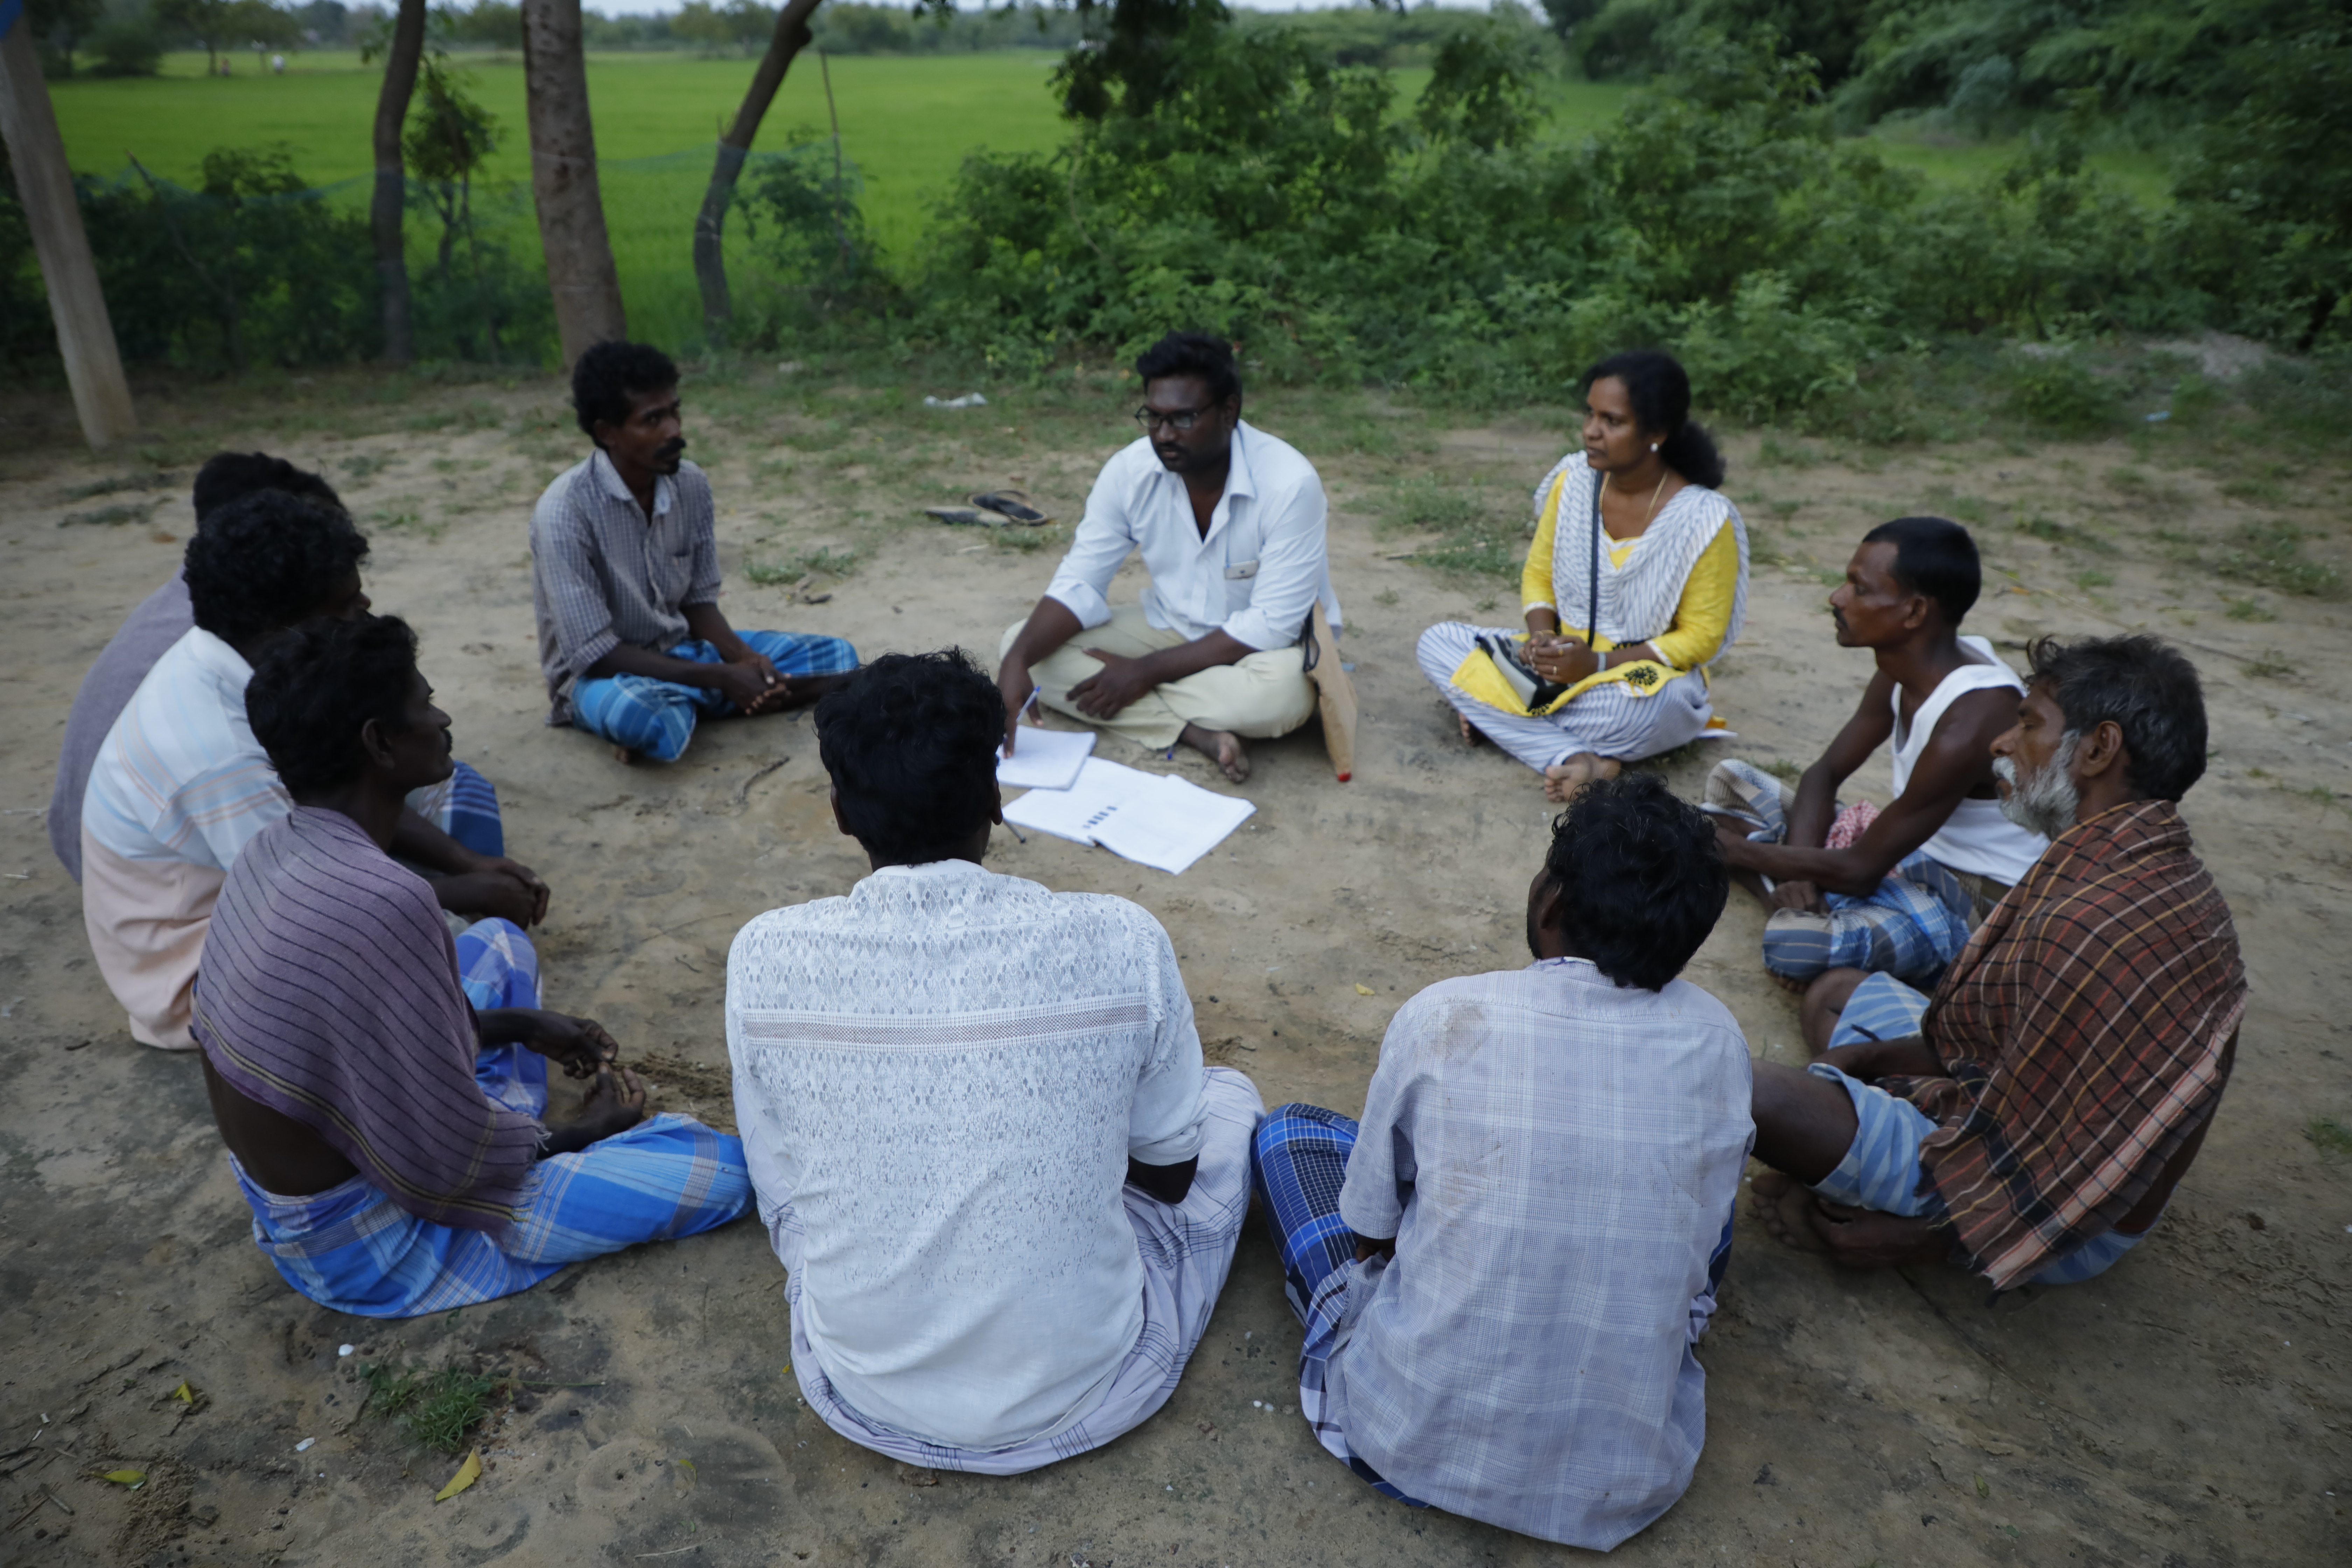 Focused group discussion with Dalit labourers